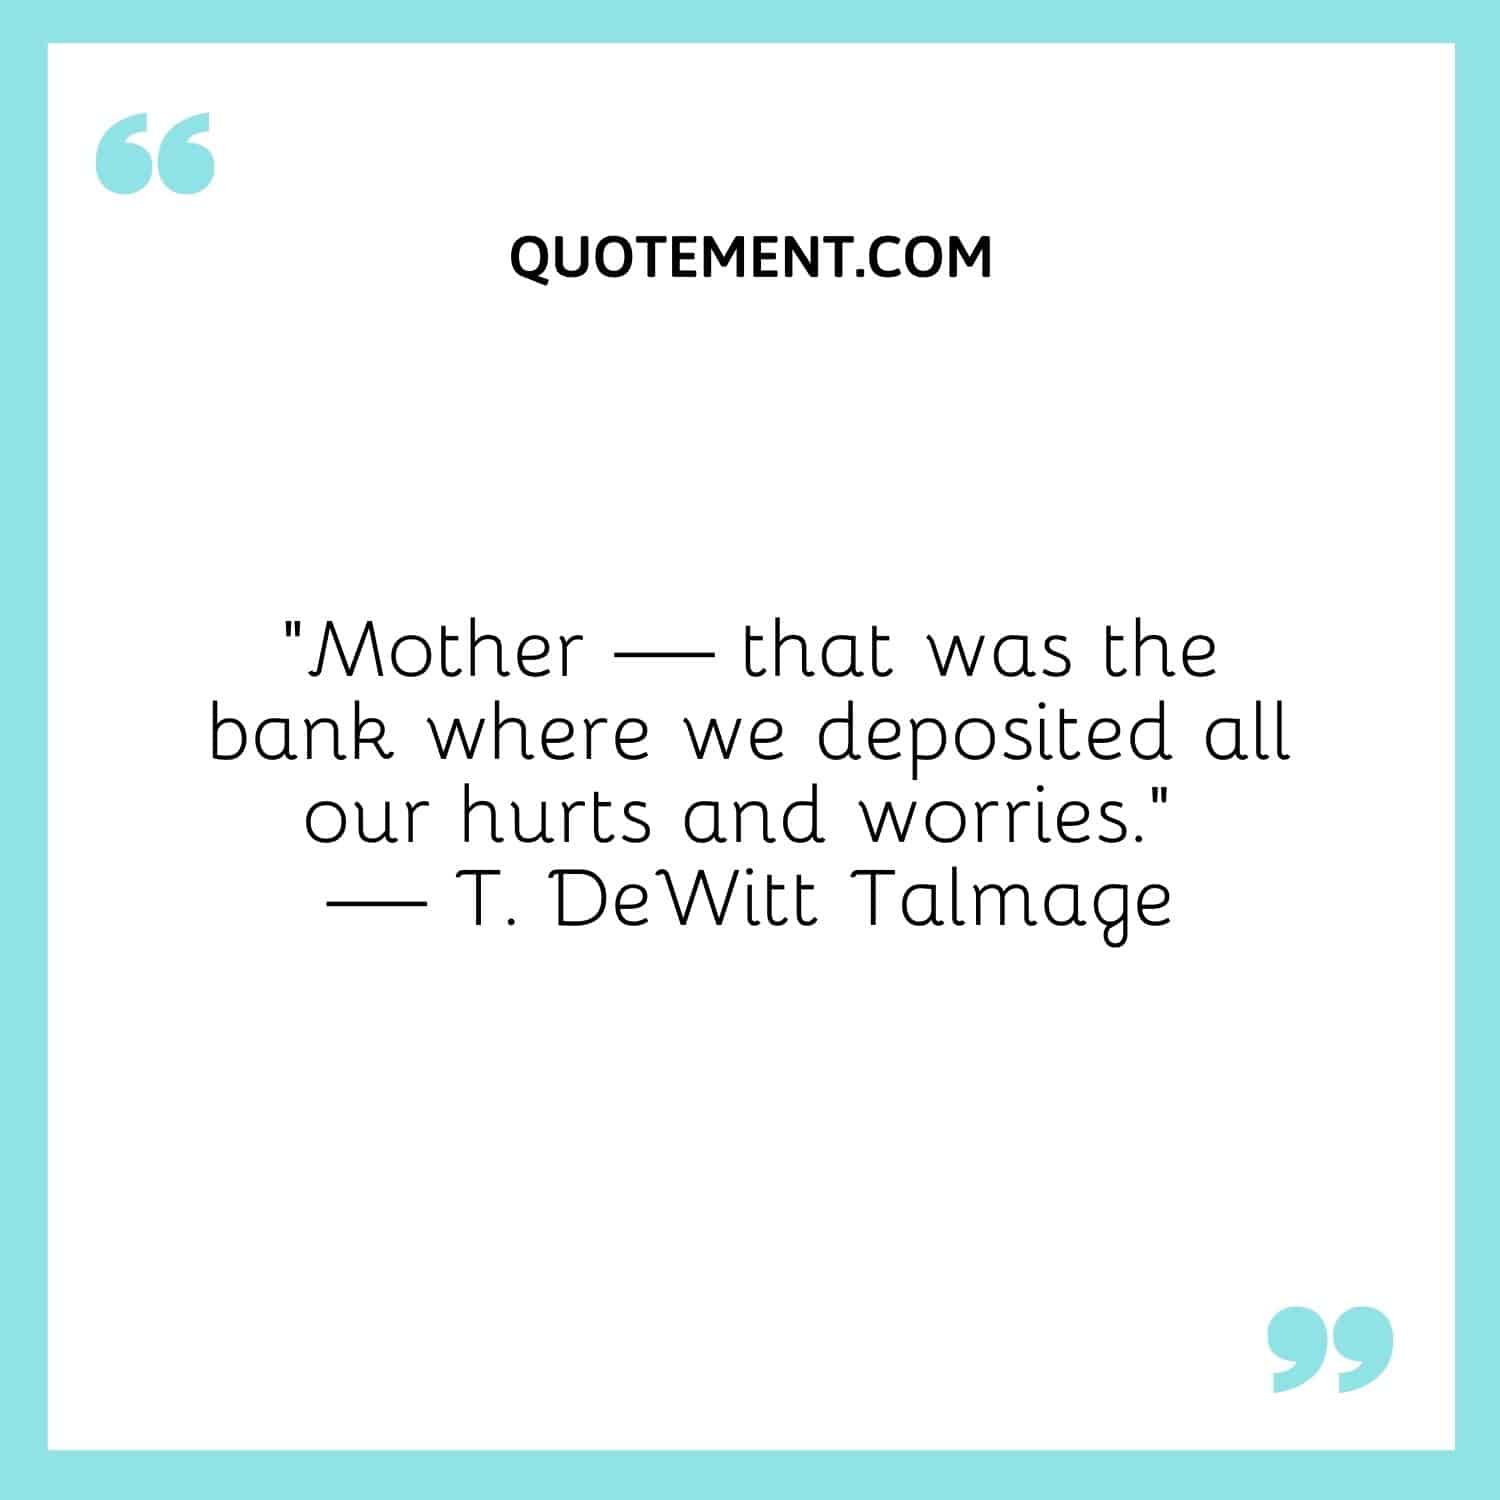 Mother — that was the bank where we deposited all our hurts and worries